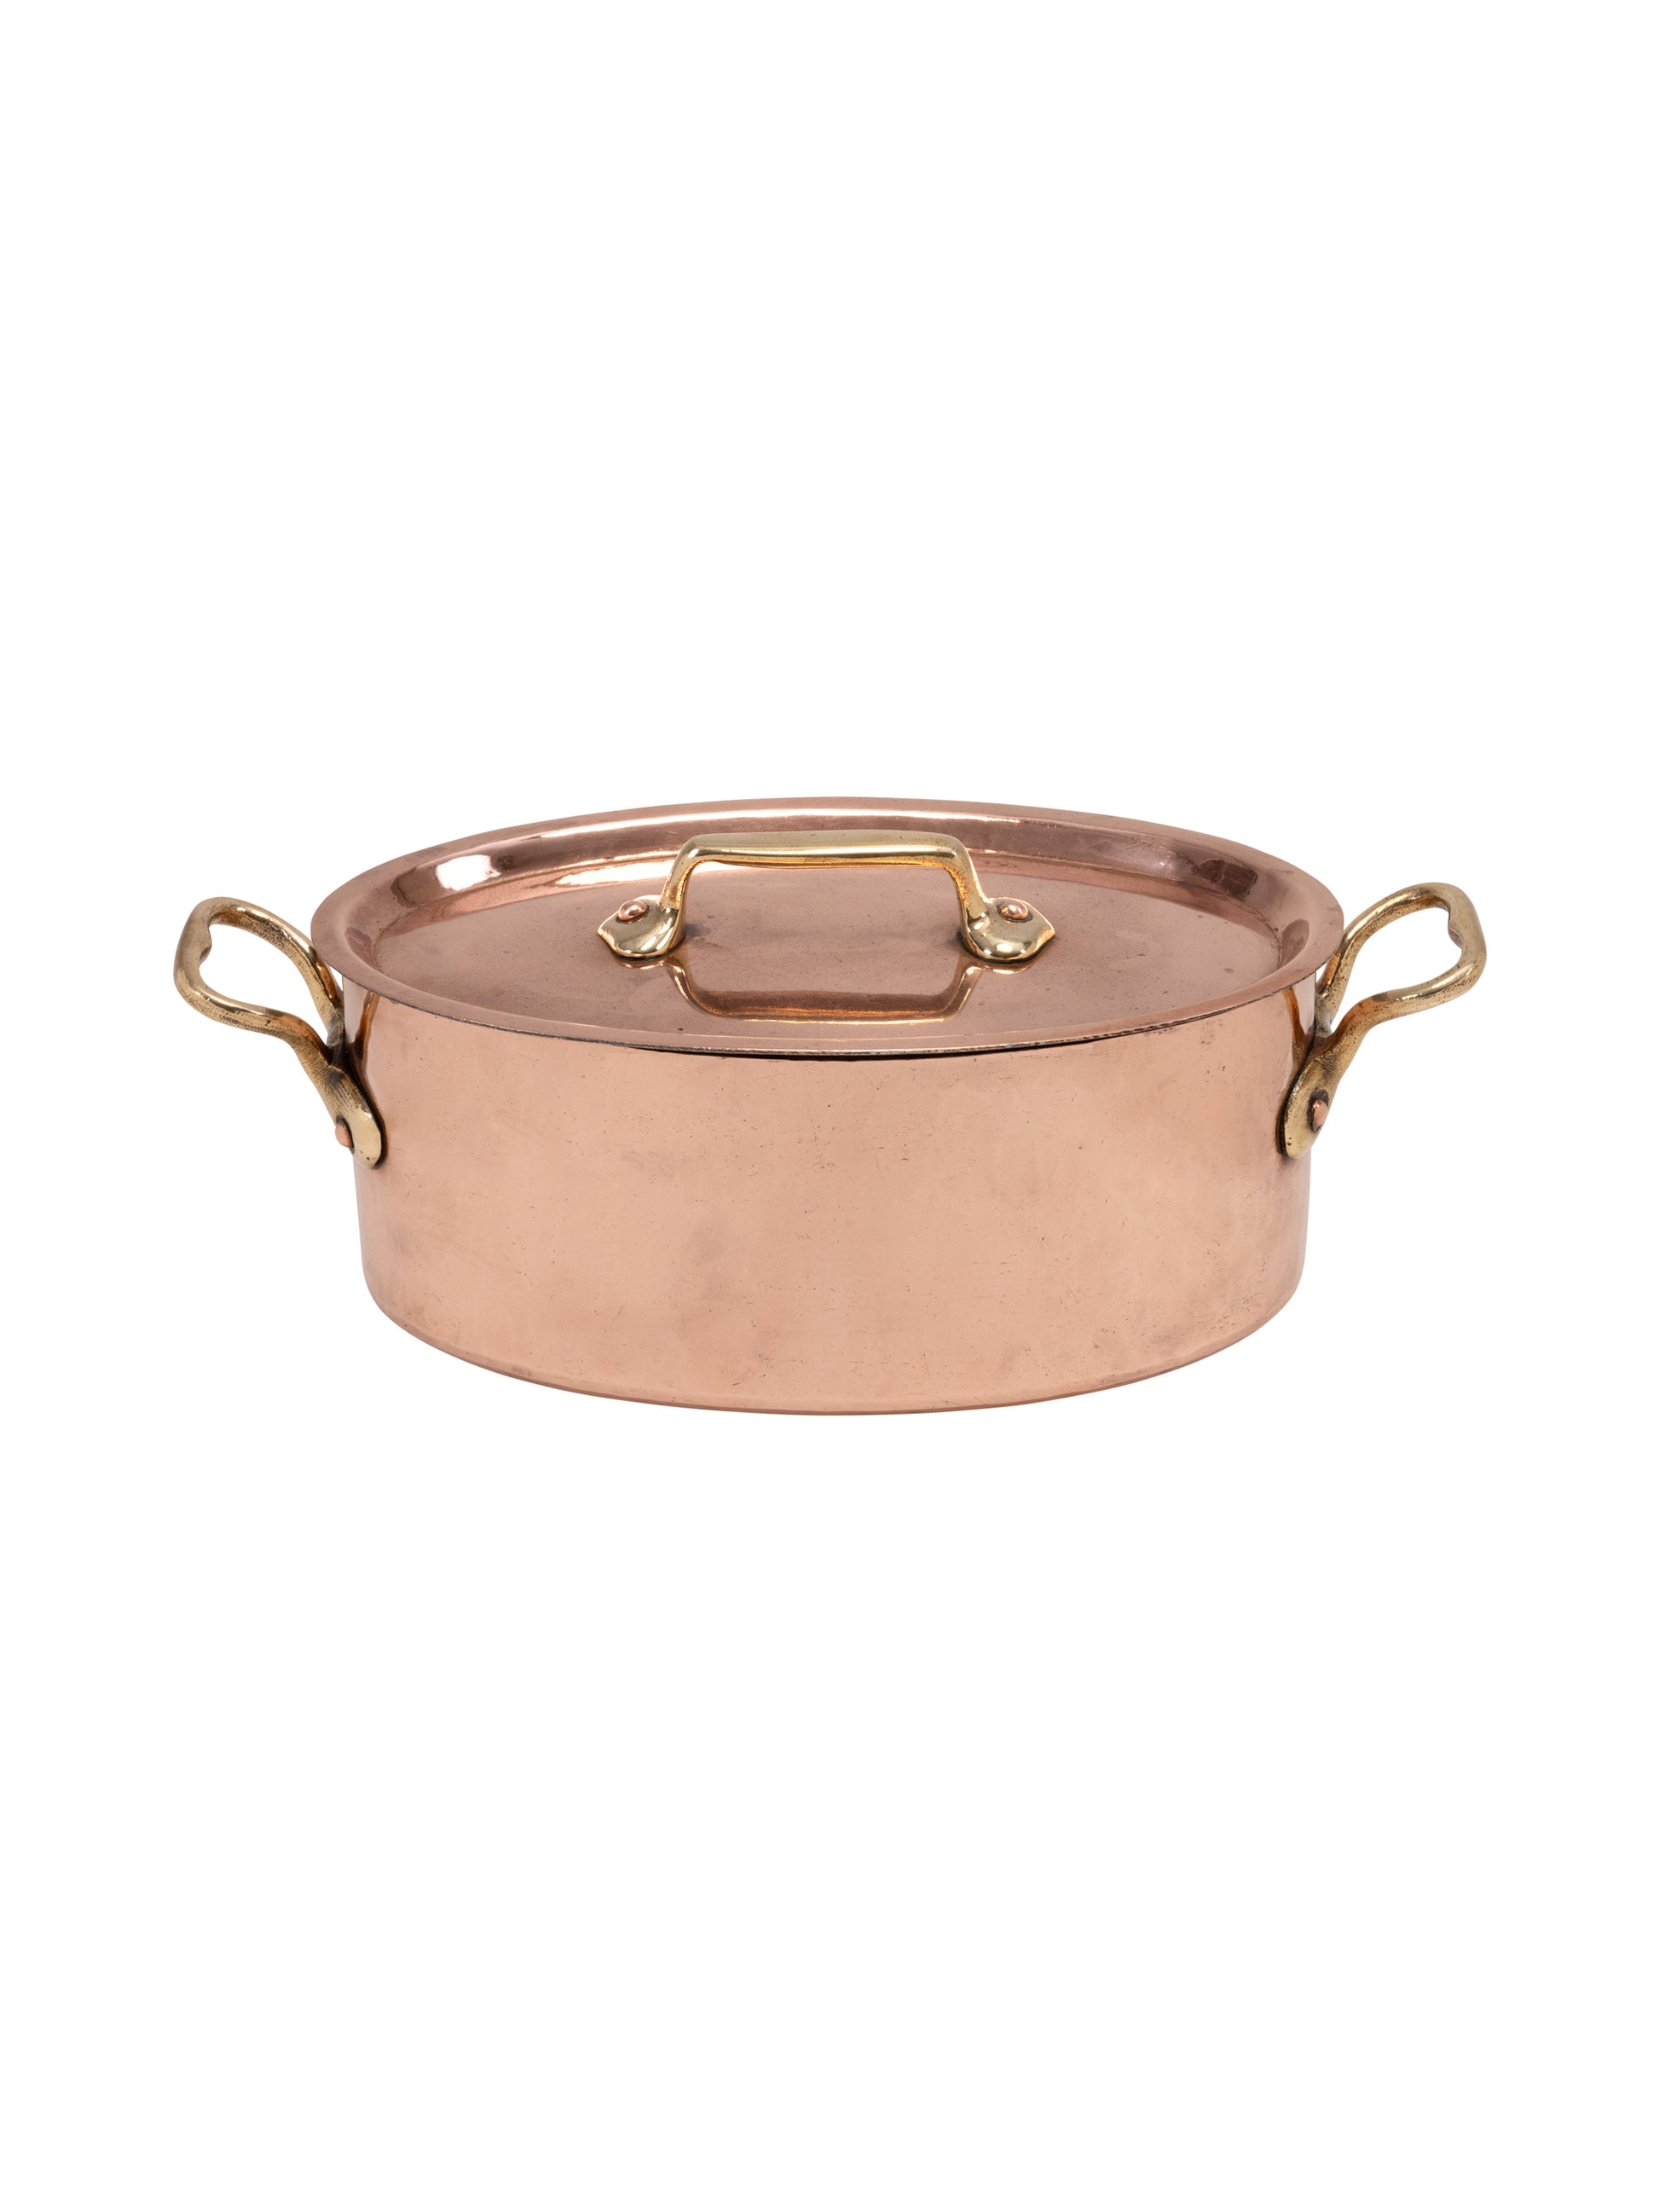 Shop the 1900 Small French Copper Casserole & Cover at Weston Table